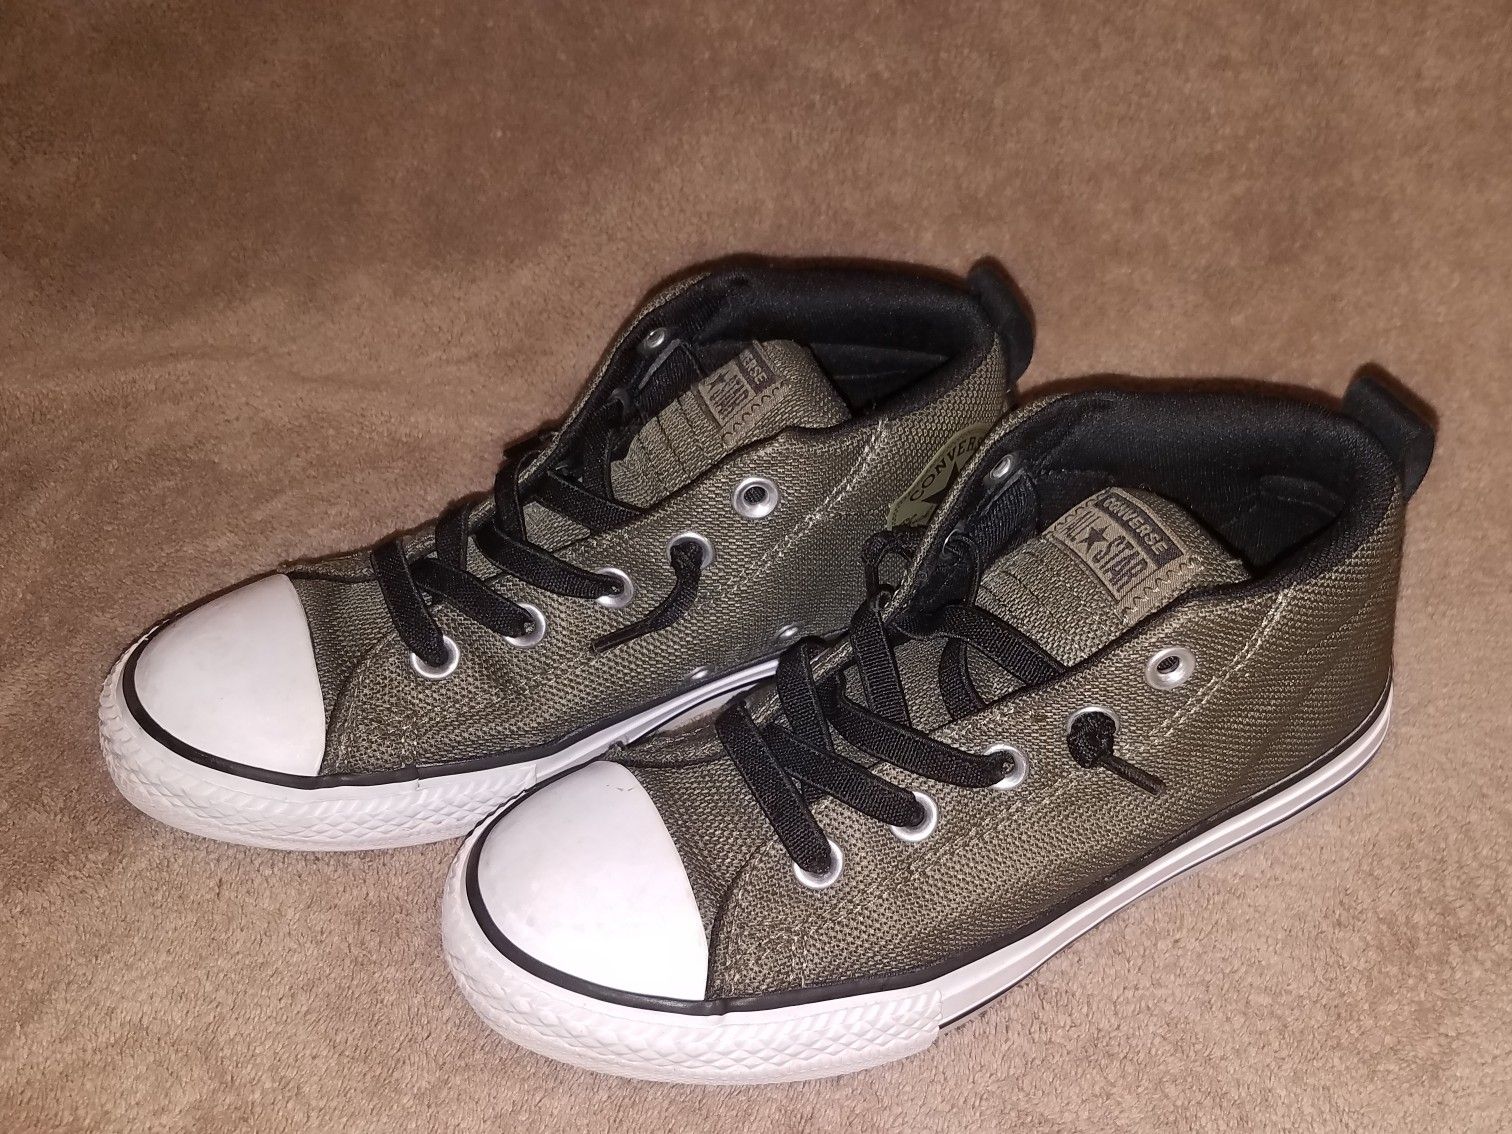 Converse youth size 3